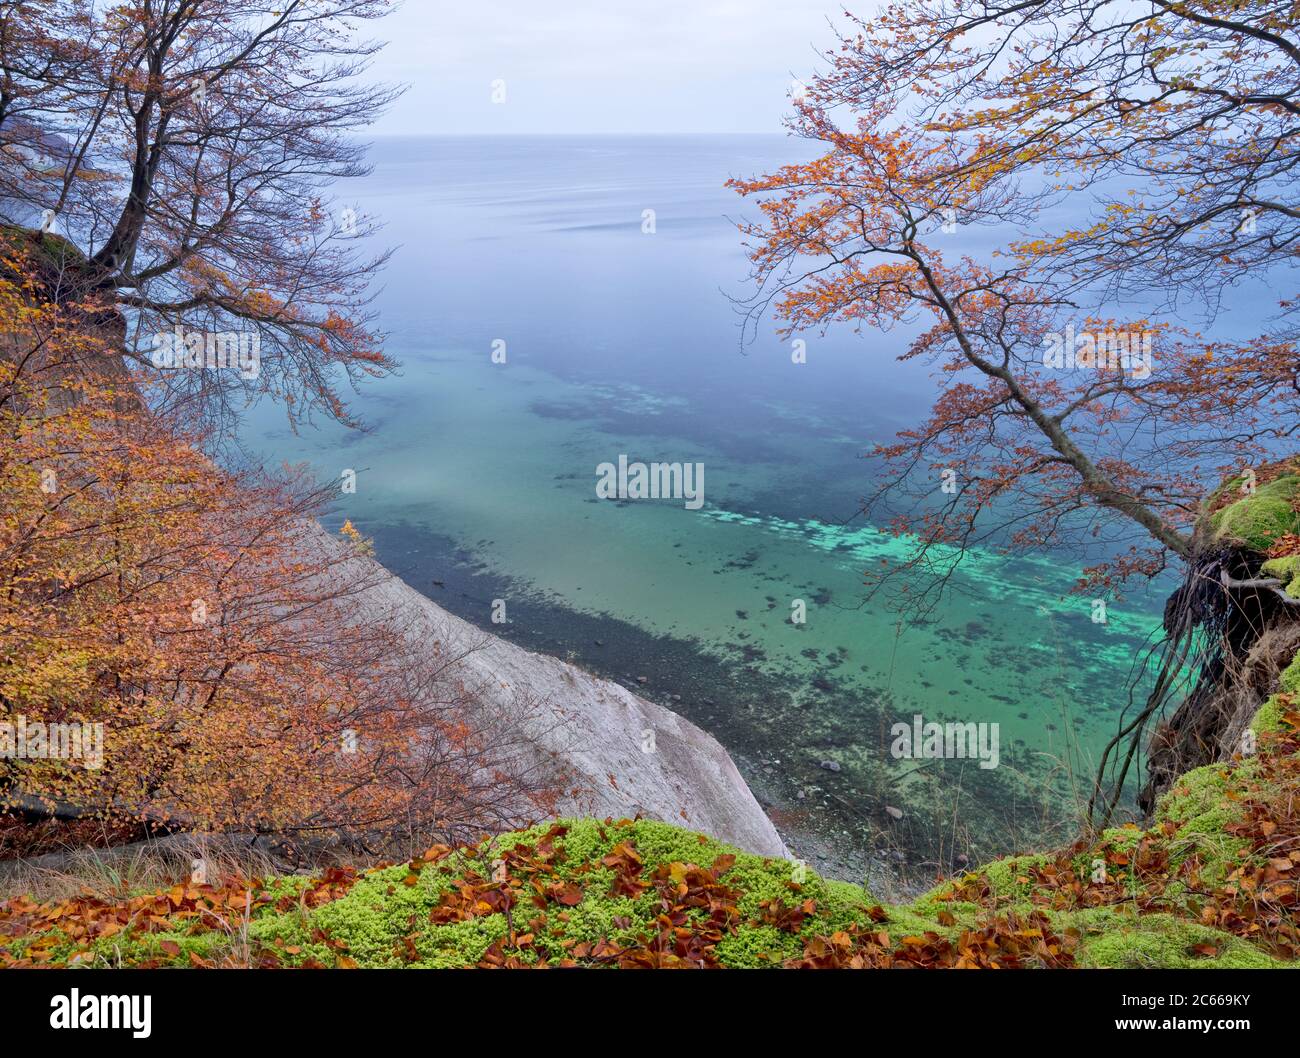 Europe, Germany, Mecklenburg-Western Pomerania, Island of Rügen, Jasmund National Park, UNESCO World Natural Heritage European beech forests, dumping red beech on the steep coast, free-hanging roots Stock Photo